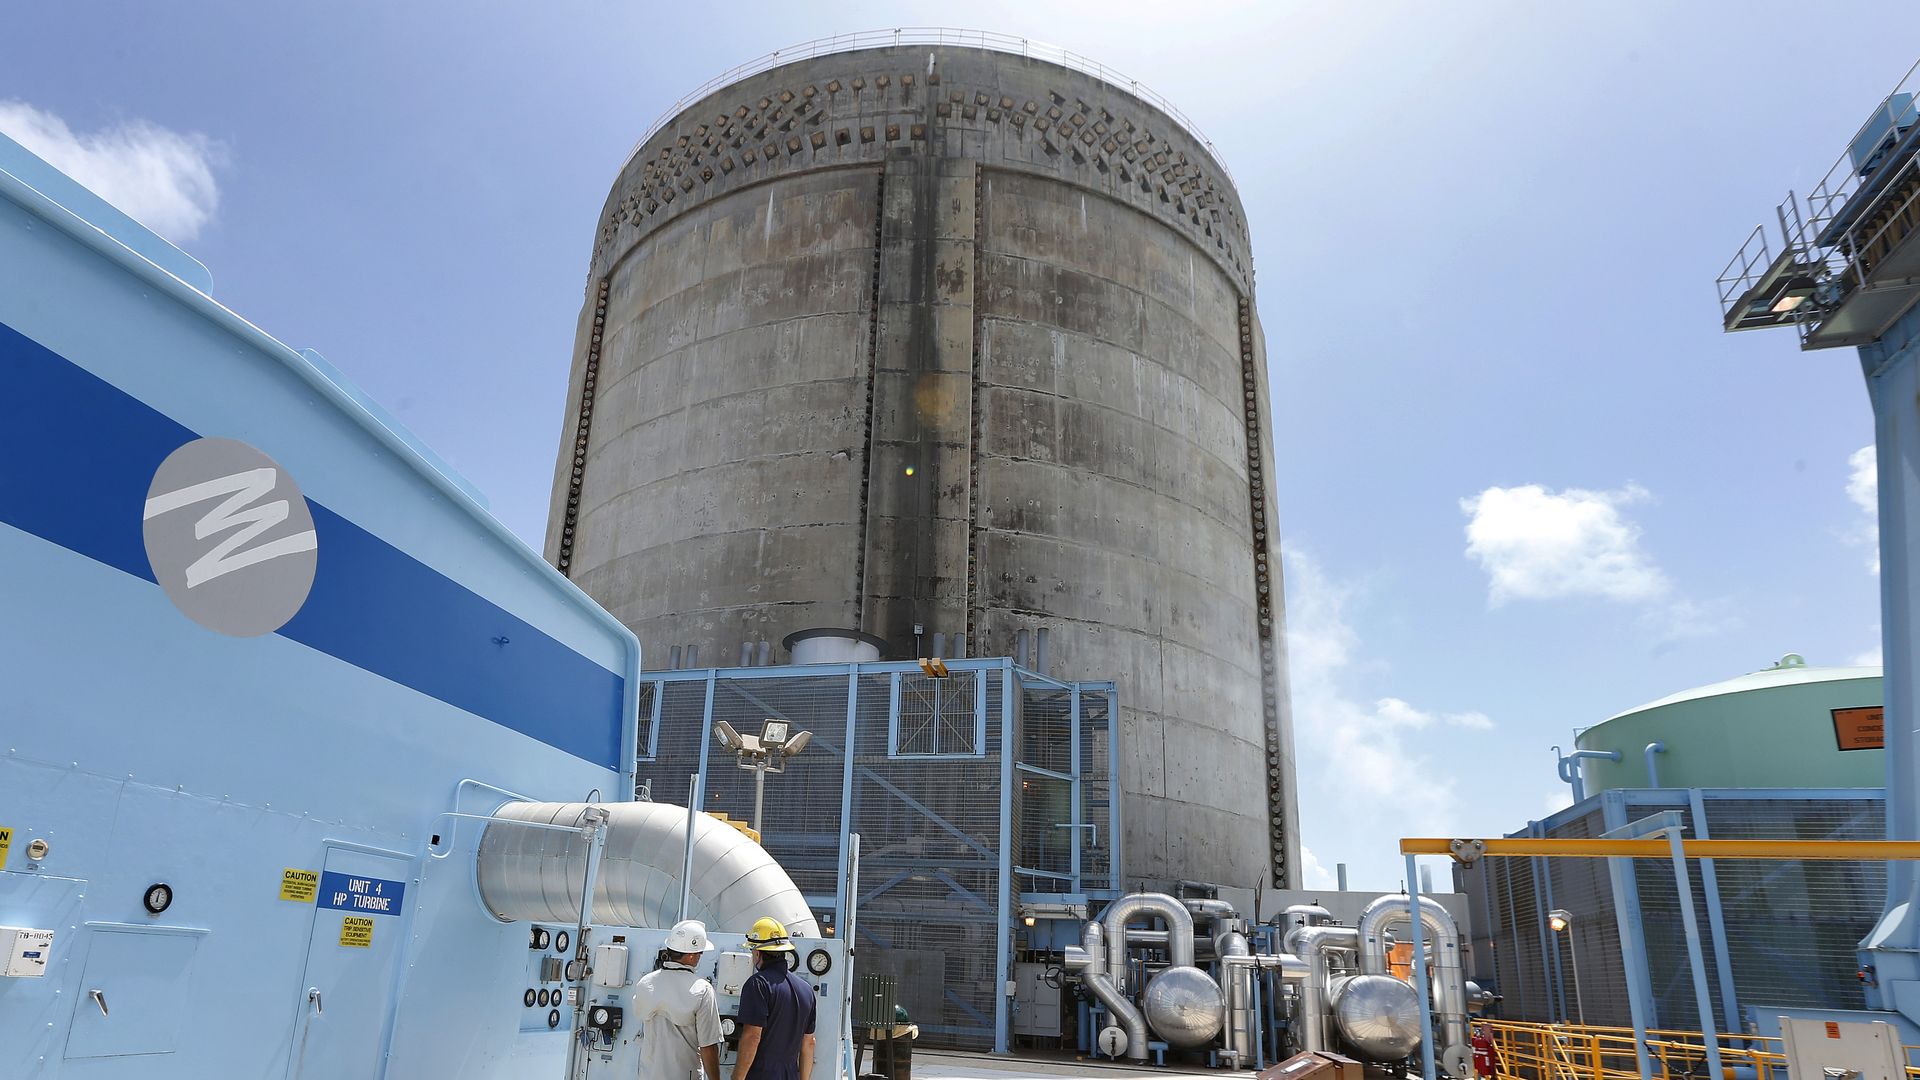 Florida Power and Light workers Juan Madruga (R) and Pehter Rodriguez (L) confer at the Turkey Point Nuclear Reactor Building in Homestead, Florida